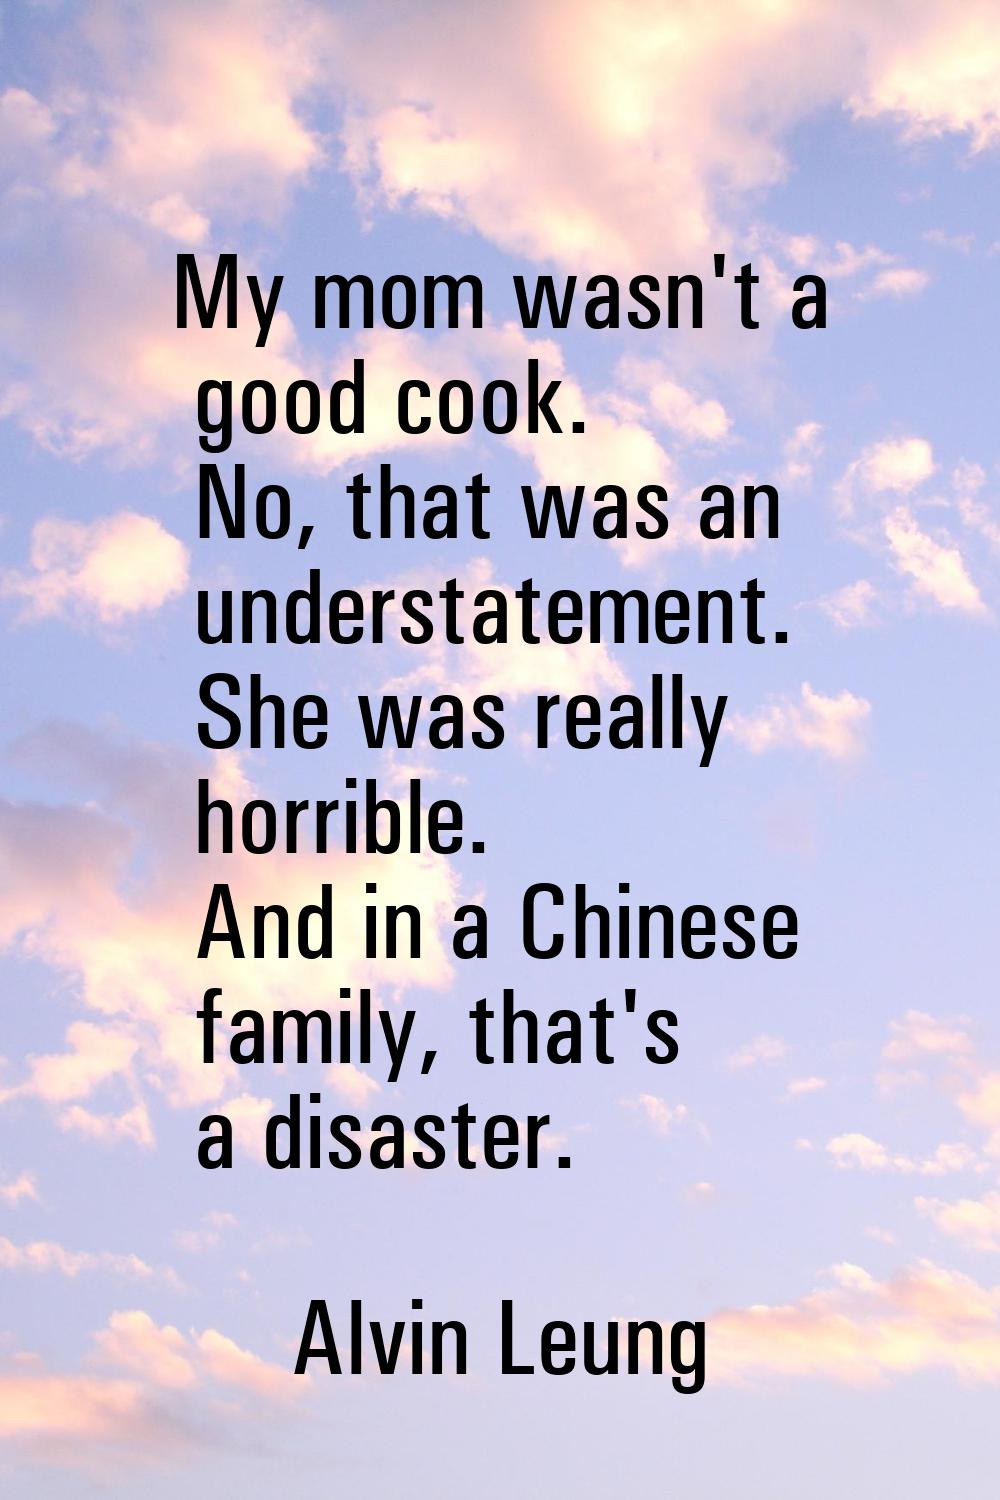 My mom wasn't a good cook. No, that was an understatement. She was really horrible. And in a Chines